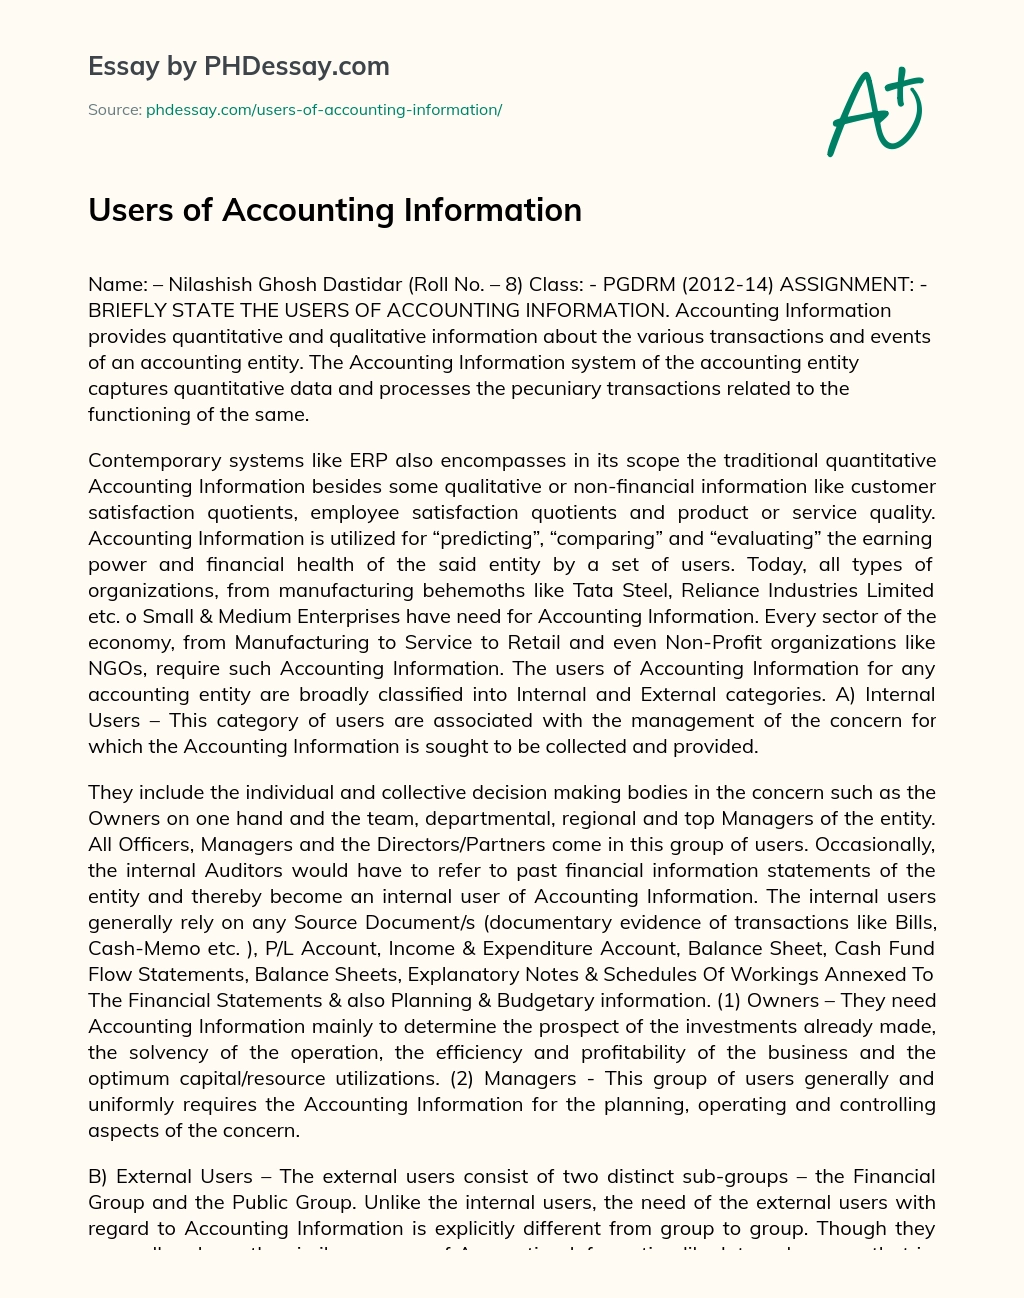 Users of Accounting Information essay